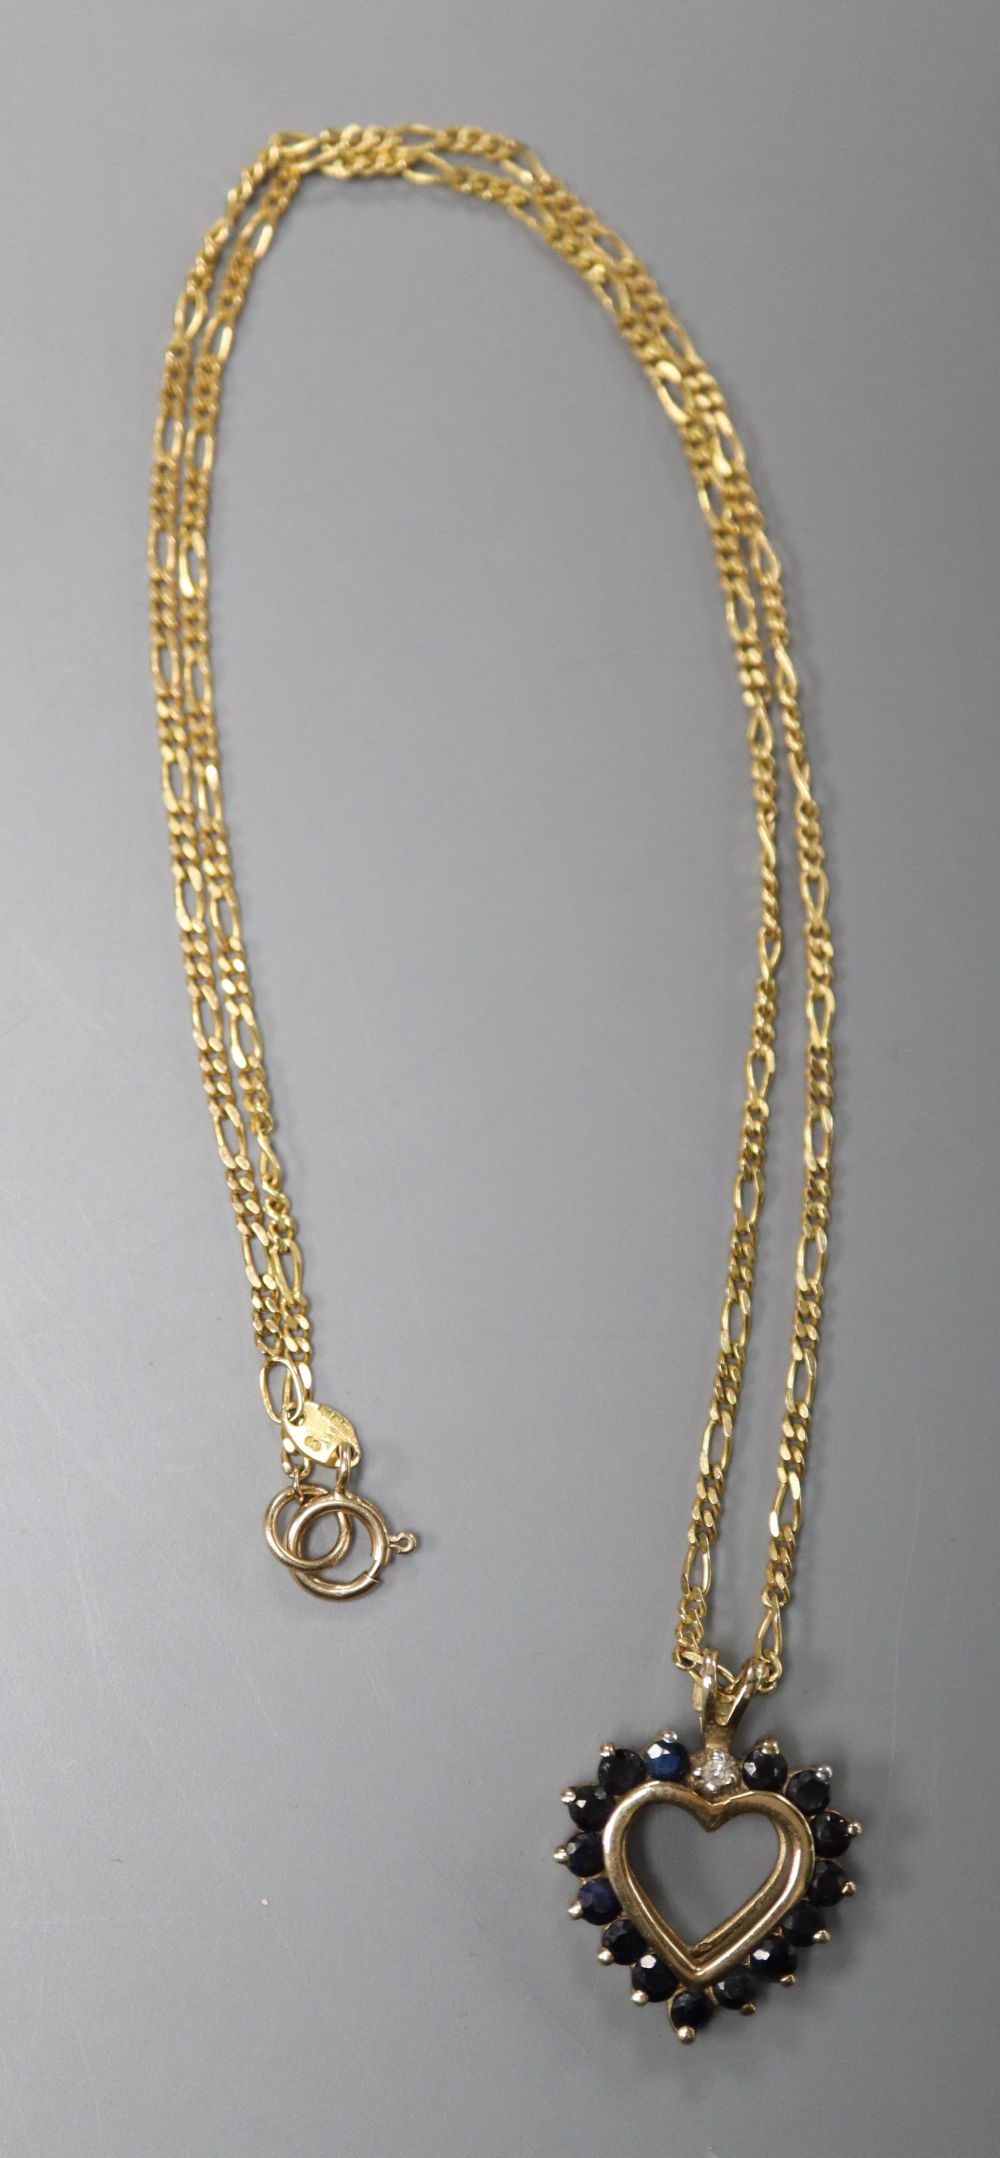 A 9ct gold, sapphire and diamond heart-shaped pendant on 9ct gold fine chain, pendant 22mm, gross 4.3 grams.